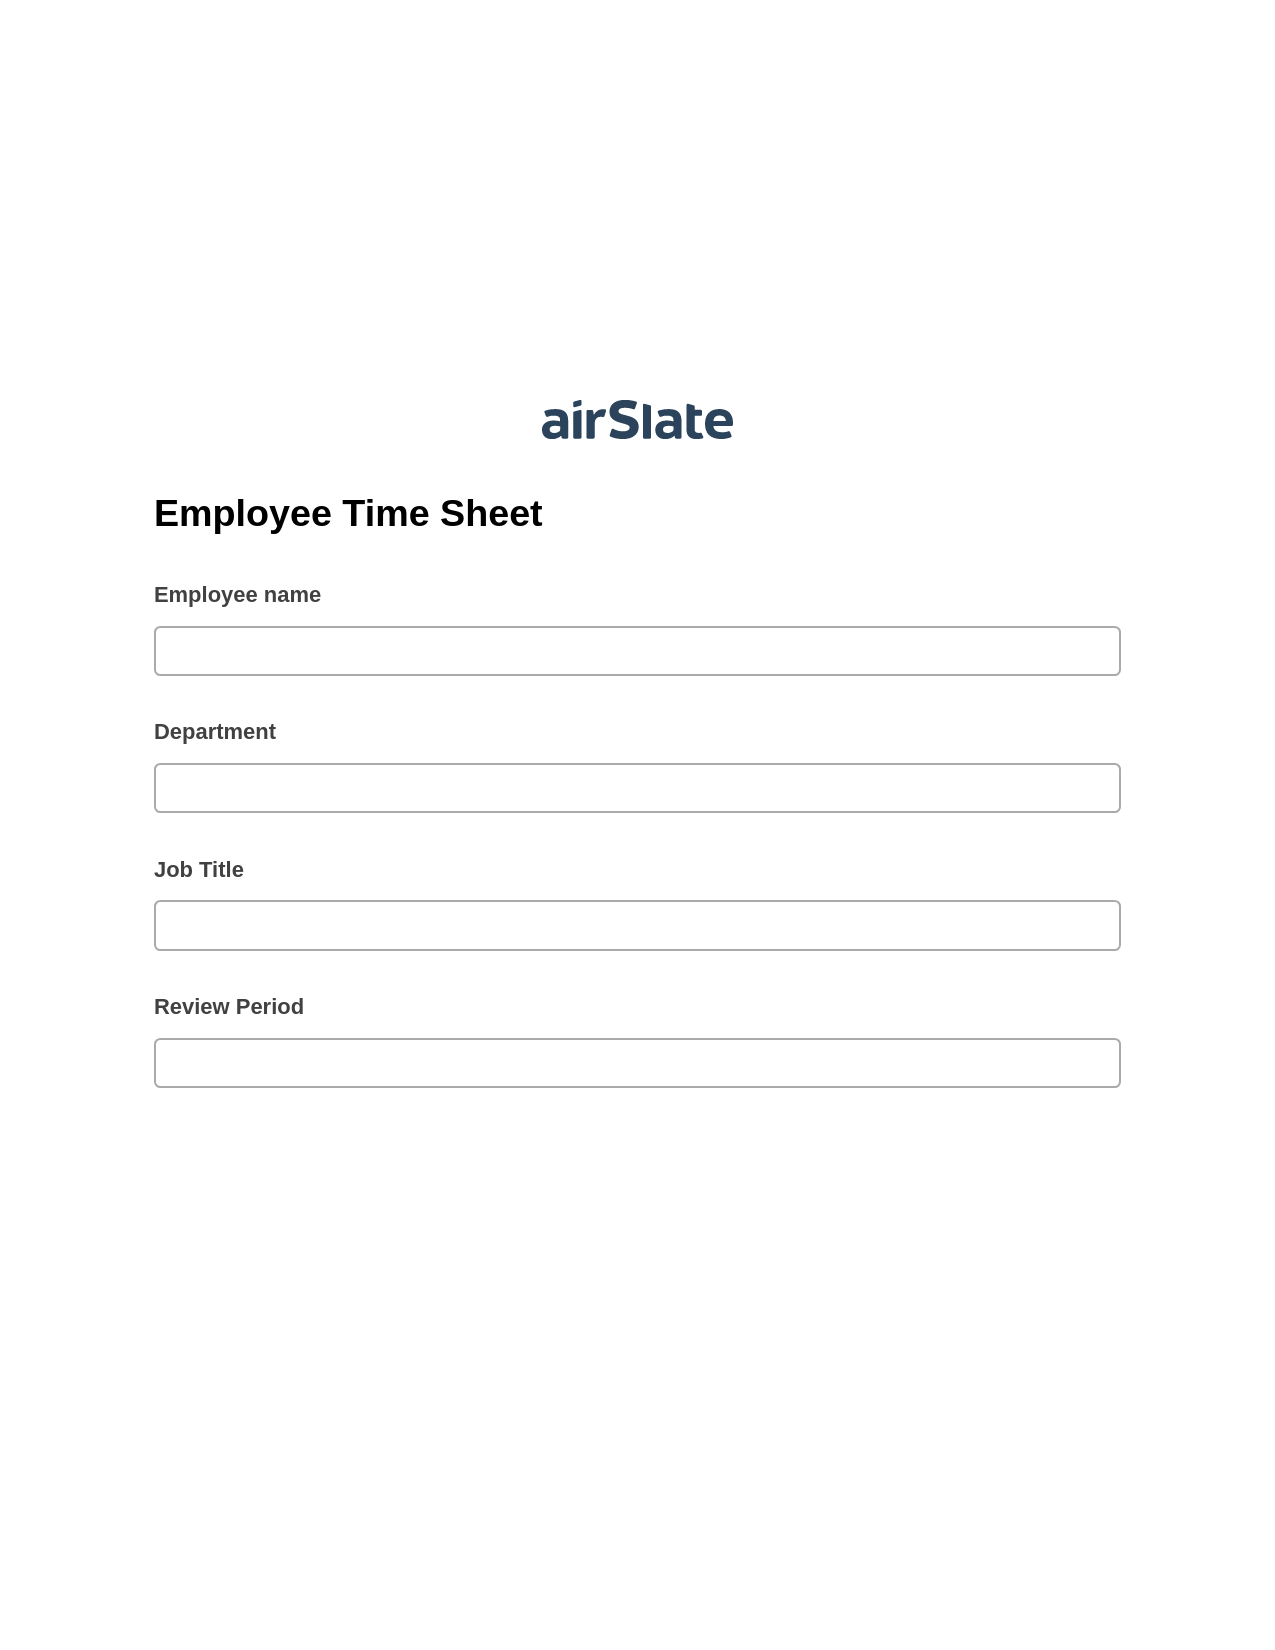 Employee Time Sheet Pre-fill from MySQL Bot, Email Notification Bot, Archive to SharePoint Folder Bot